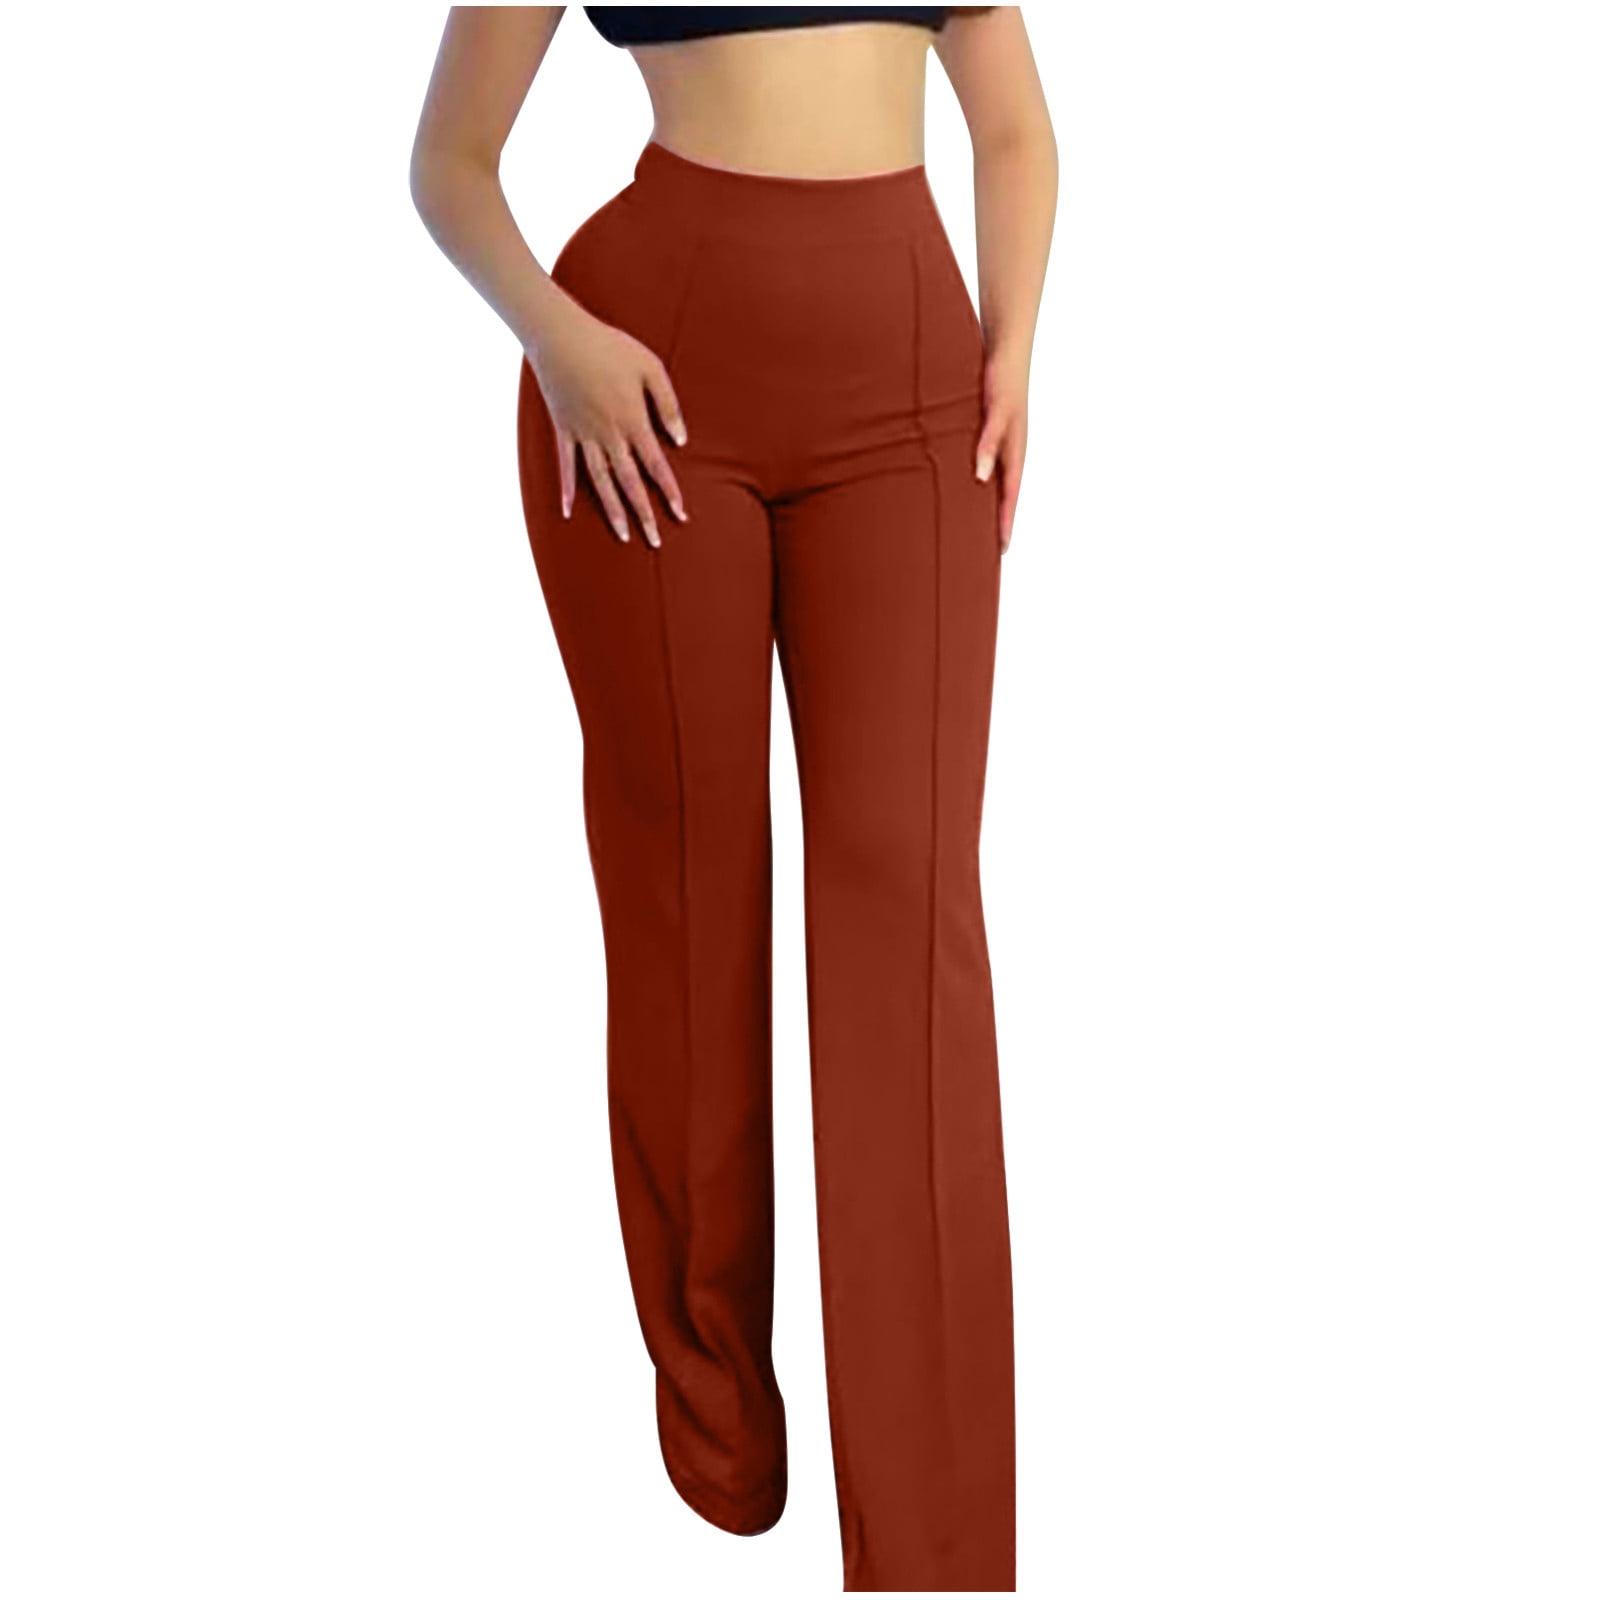 YWDJ Bell Bottom Pants for Women 70s High Waist High Rise Flared Bell Bottom  Elastic Waist Casual Stretchy Long Pant Fashion Comfortable Solid Color  Leisure Pants Pants for Everyday Wear 31-Brown S 